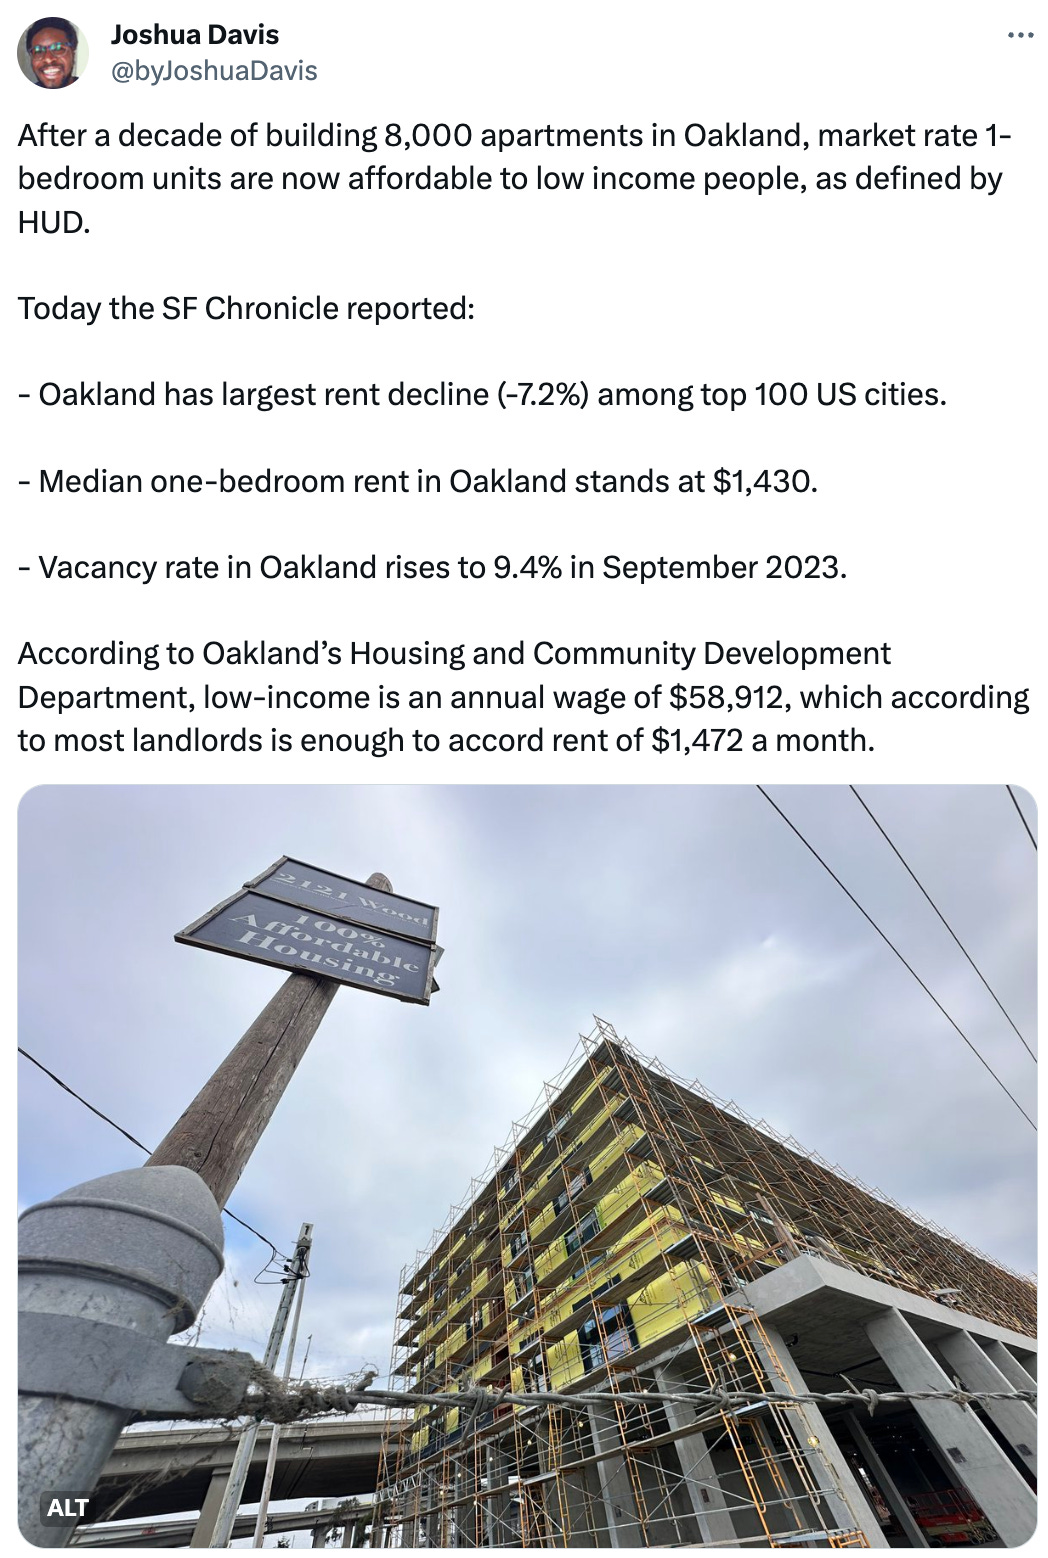  Joshua Davis @byJoshuaDavis After a decade of building 8,000 apartments in Oakland, market rate 1-bedroom units are now affordable to low income people, as defined by HUD.  Today the SF Chronicle reported:  - Oakland has largest rent decline (-7.2%) among top 100 US cities.  - Median one-bedroom rent in Oakland stands at $1,430.  - Vacancy rate in Oakland rises to 9.4% in September 2023.  According to Oakland’s Housing and Community Development Department, low-income is an annual wage of $58,912, which according to most landlords is enough to accord rent of $1,472 a month.